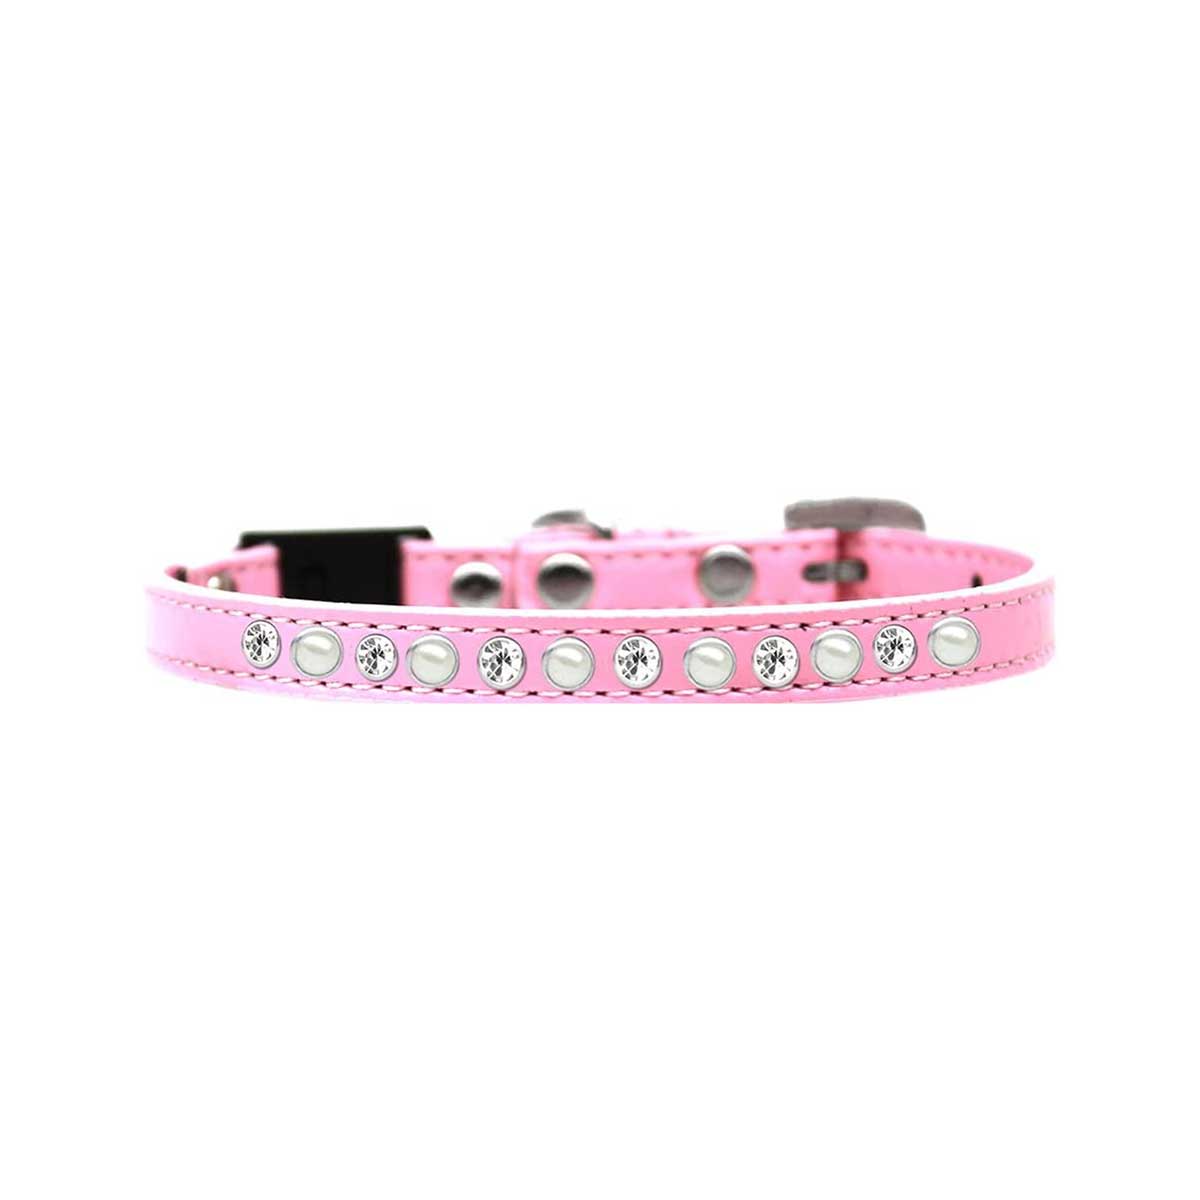 Pearl and Rhinestone Cat Safety Collar in Pink | Pawlicious & Company